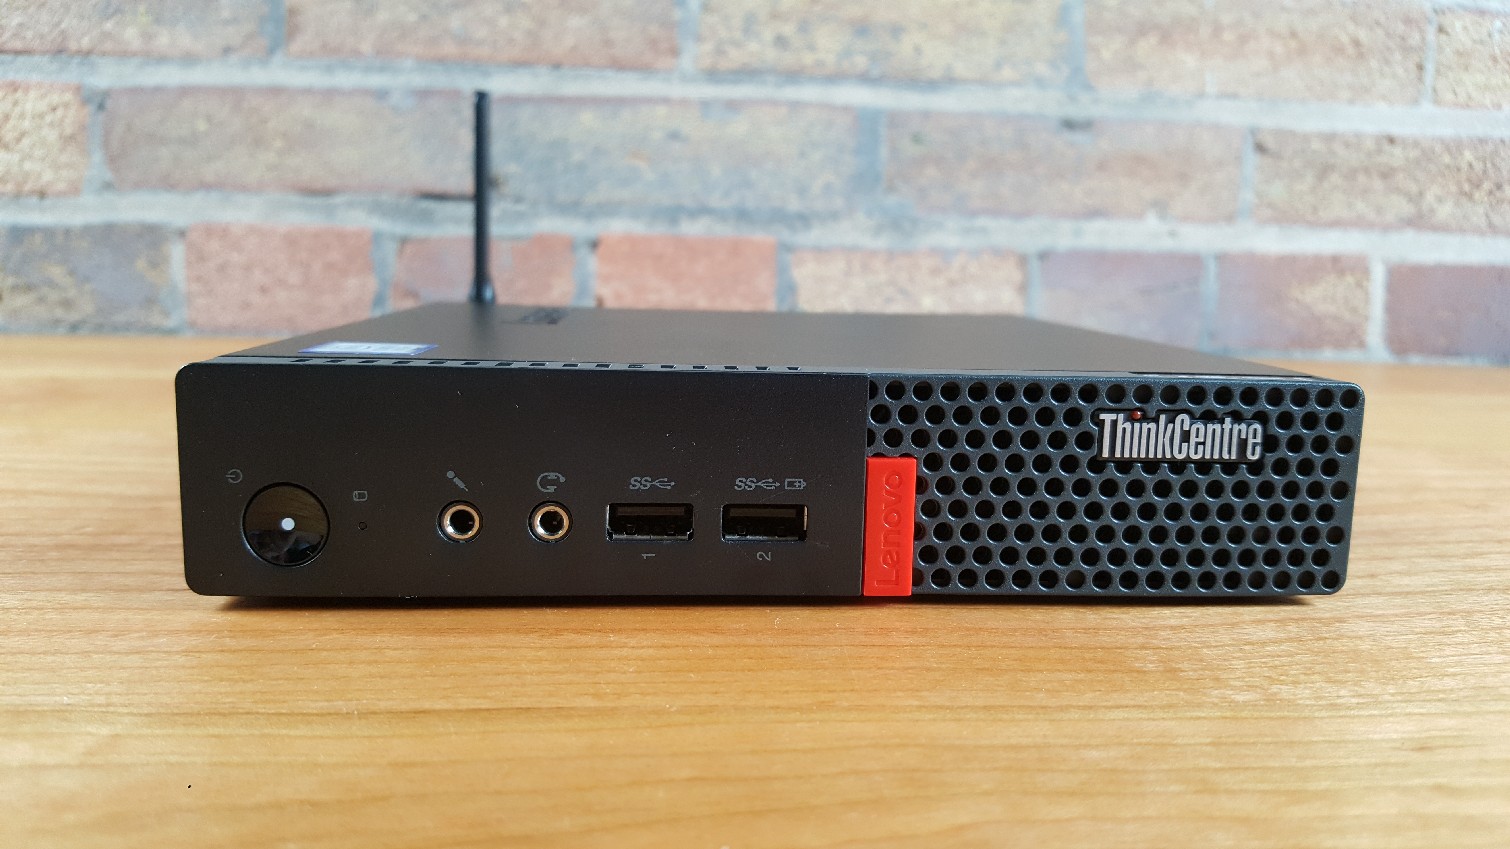 Lenovo ThinkCentre M710q Tiny - Full Review and Benchmarks | Tom's